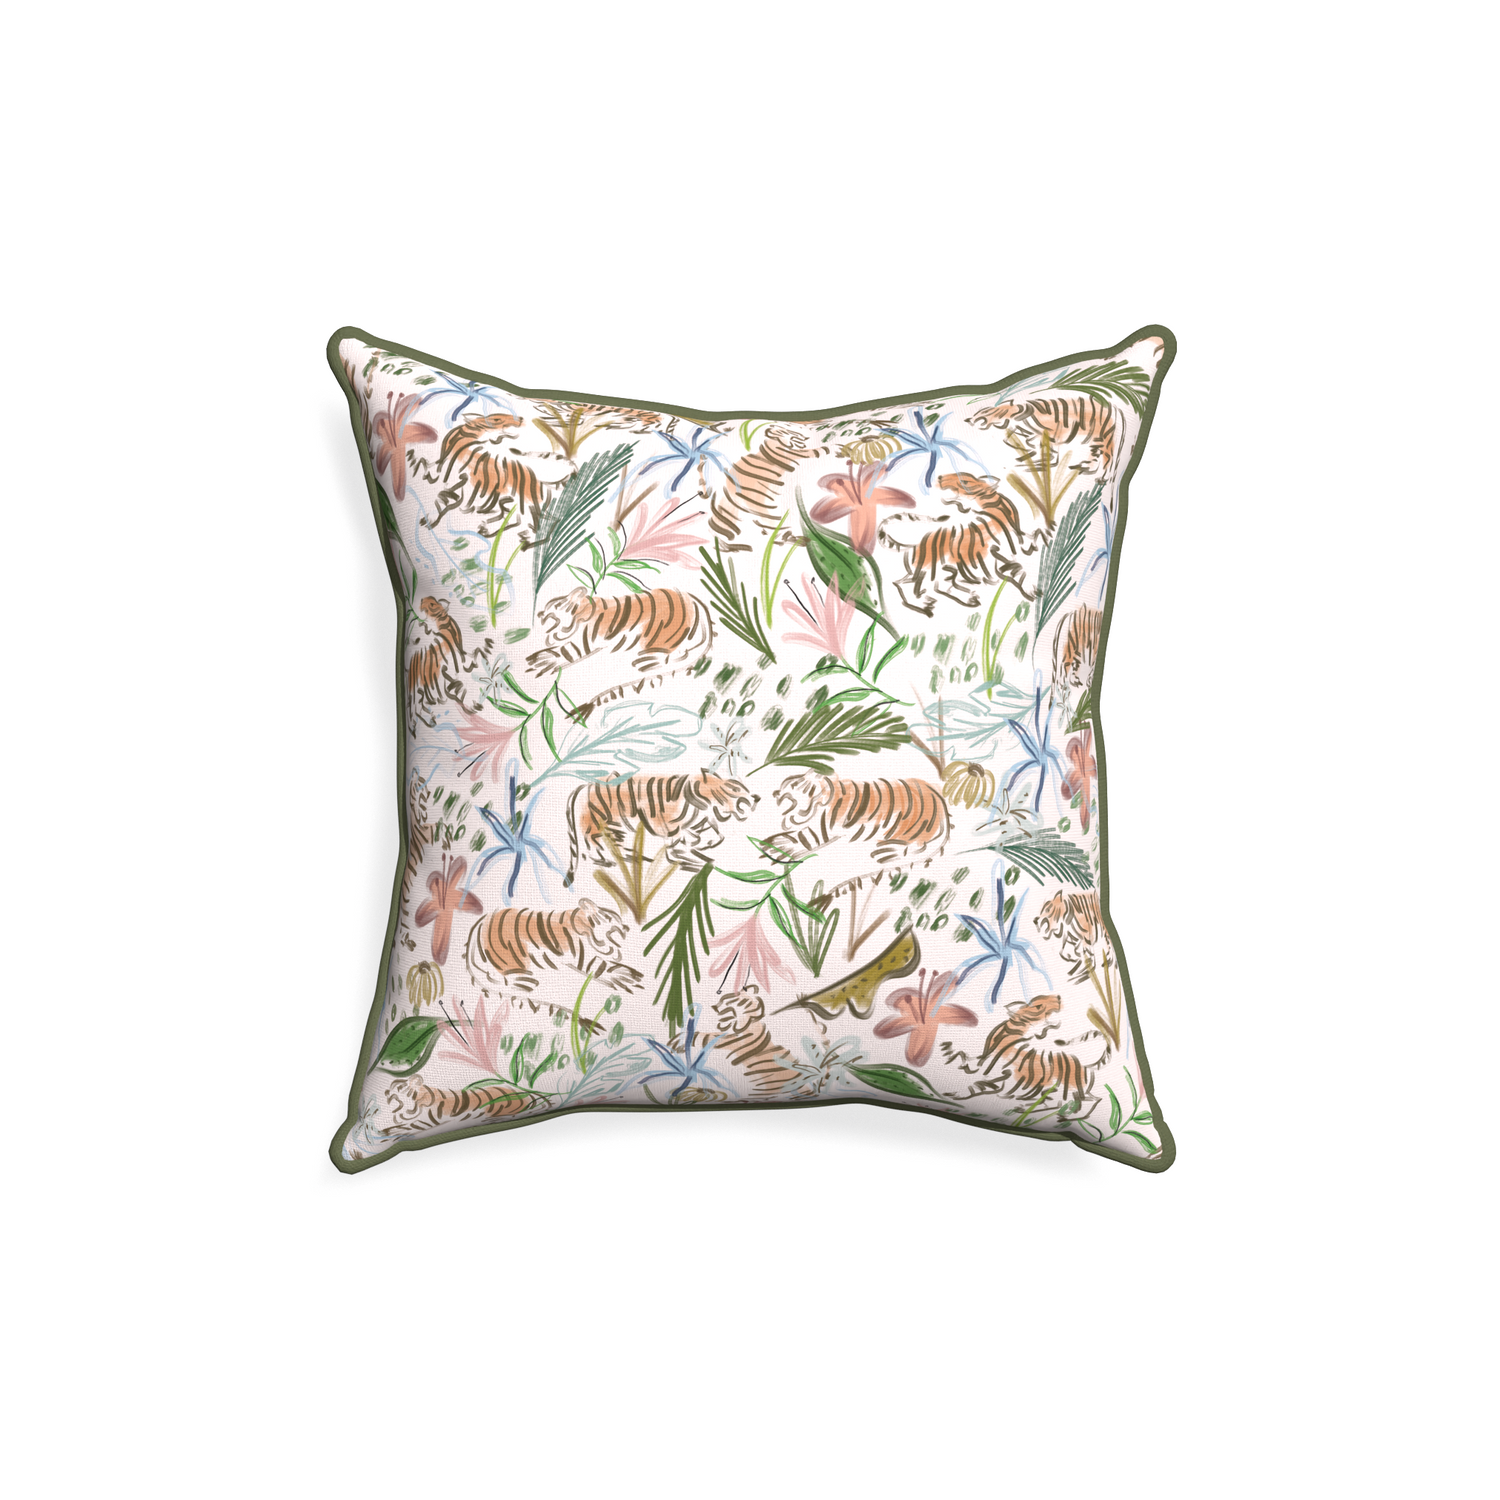 18-square frida pink custom pink chinoiserie tigerpillow with f piping on white background